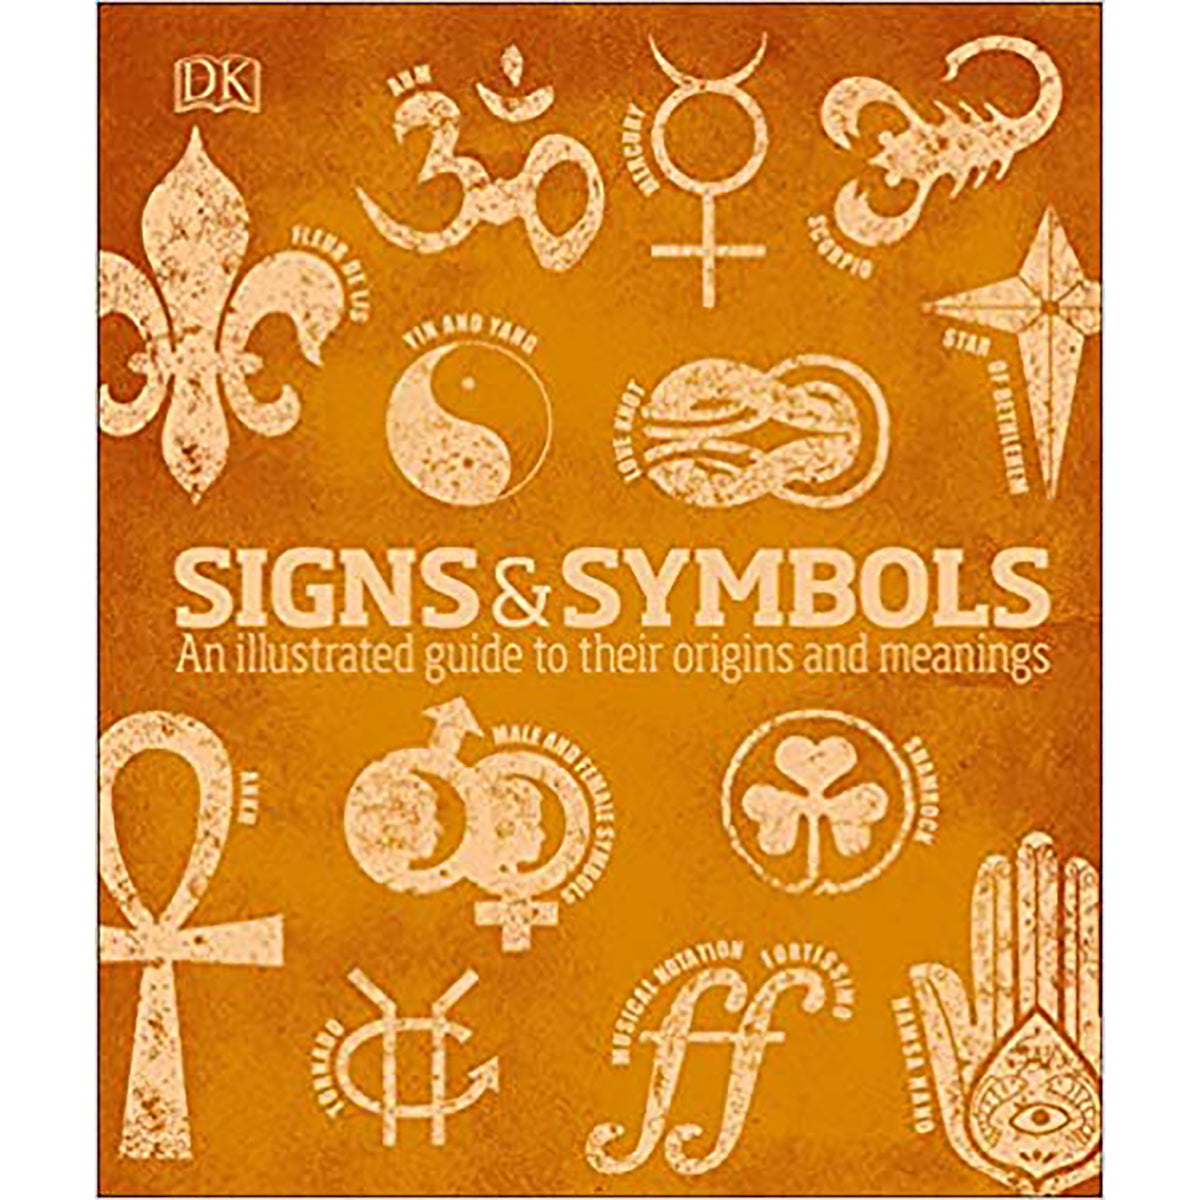 Signs and Symbols: An Illustrated guide to Their Origins and Meanings